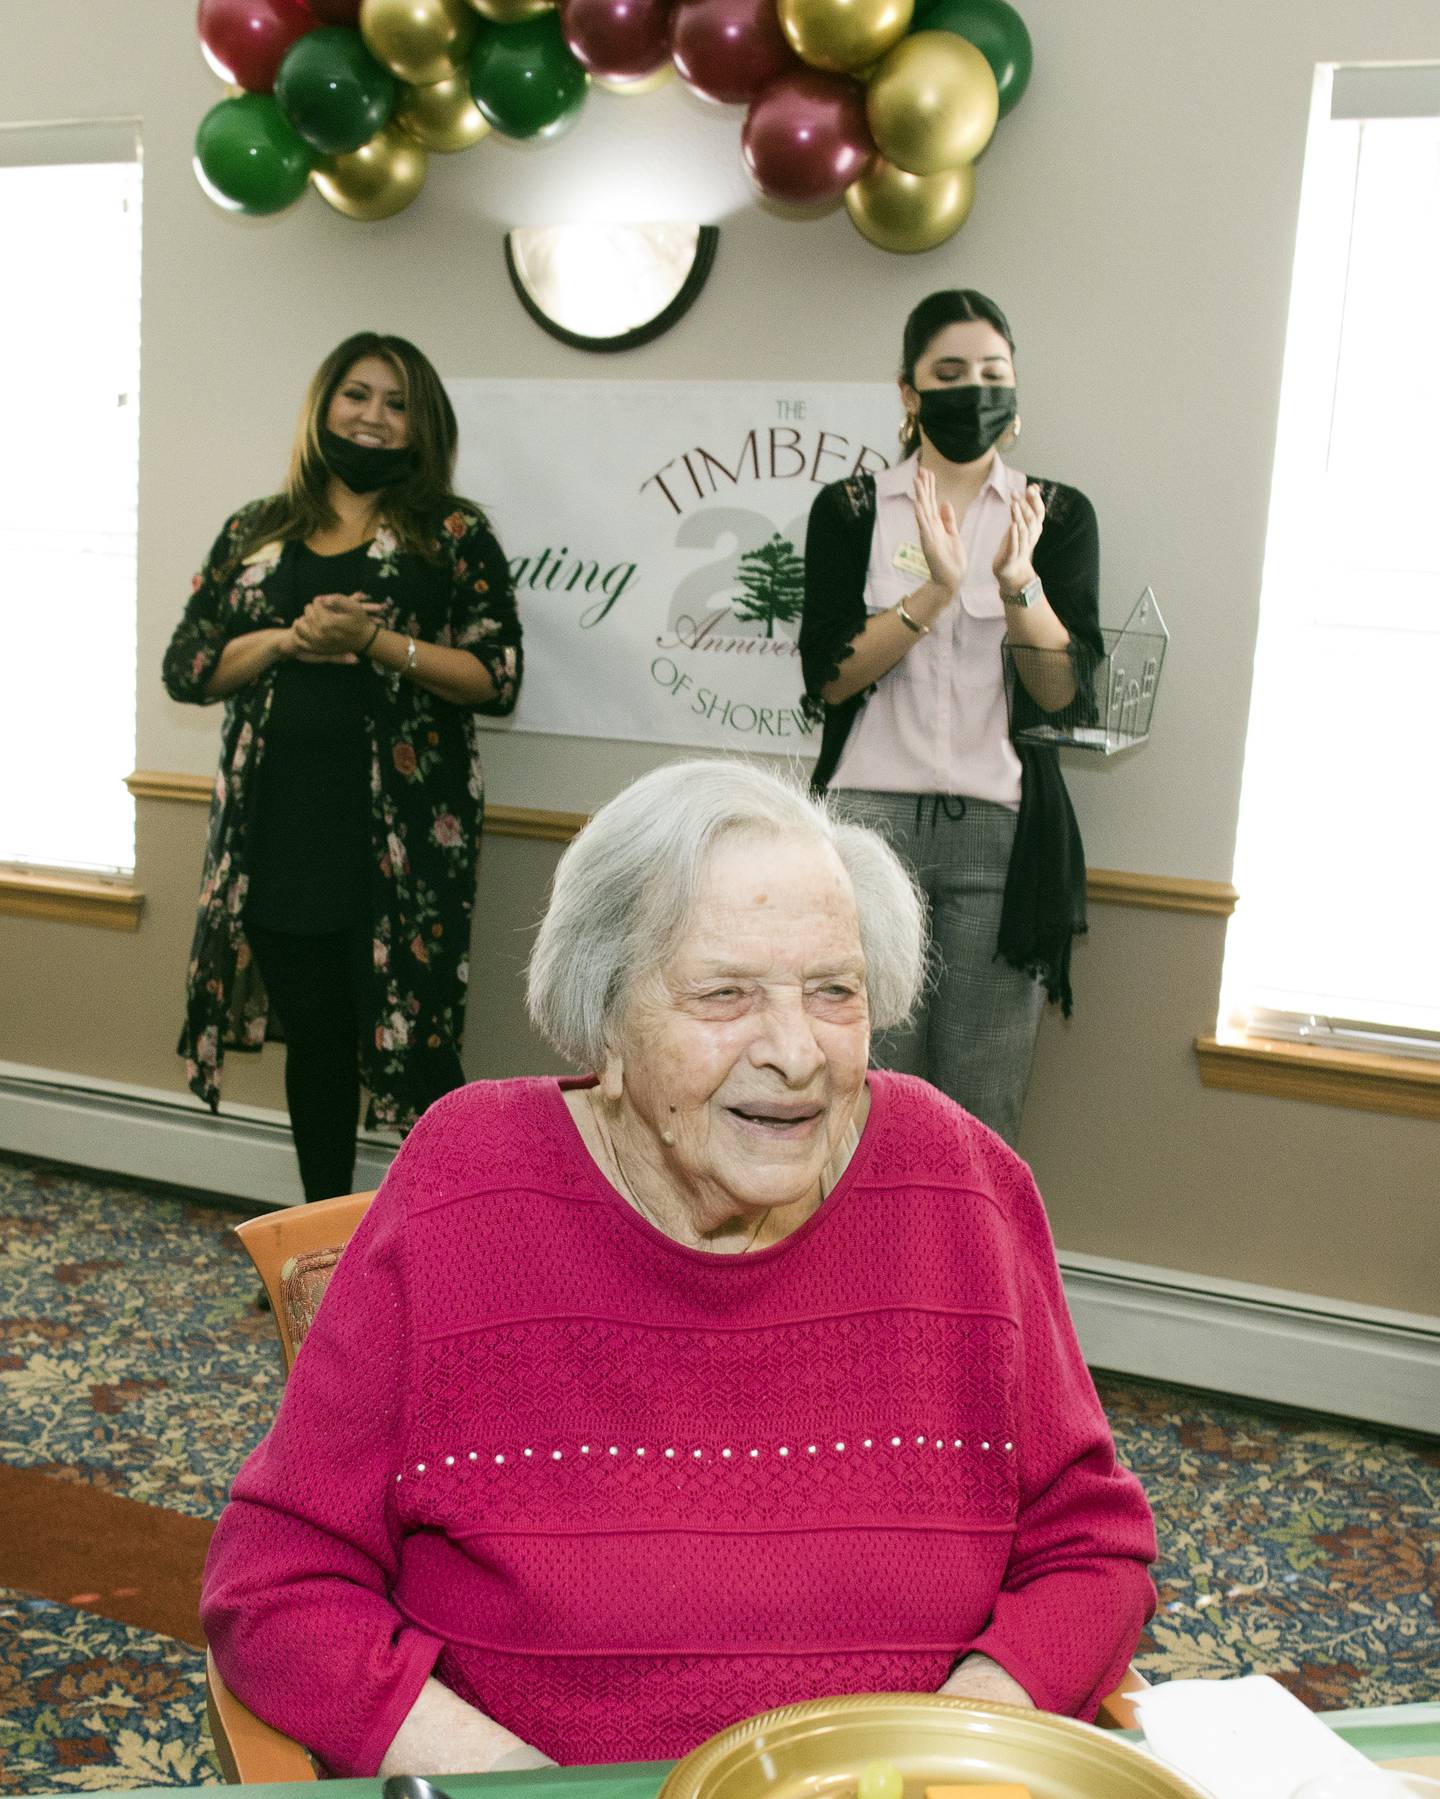 Timbers of Shorewood resident Jean Thuringer is seen during the Timbers of Shorewood 20th Anniversary on Thursday, October 13, 2022, in Shorewood, Ill.  Thuringer, age 102, is one of the original residents of the Timbers of Shorewood. Thuringer moved into the Timbers in 2002 and was queen of the "senior" prom in 2007.